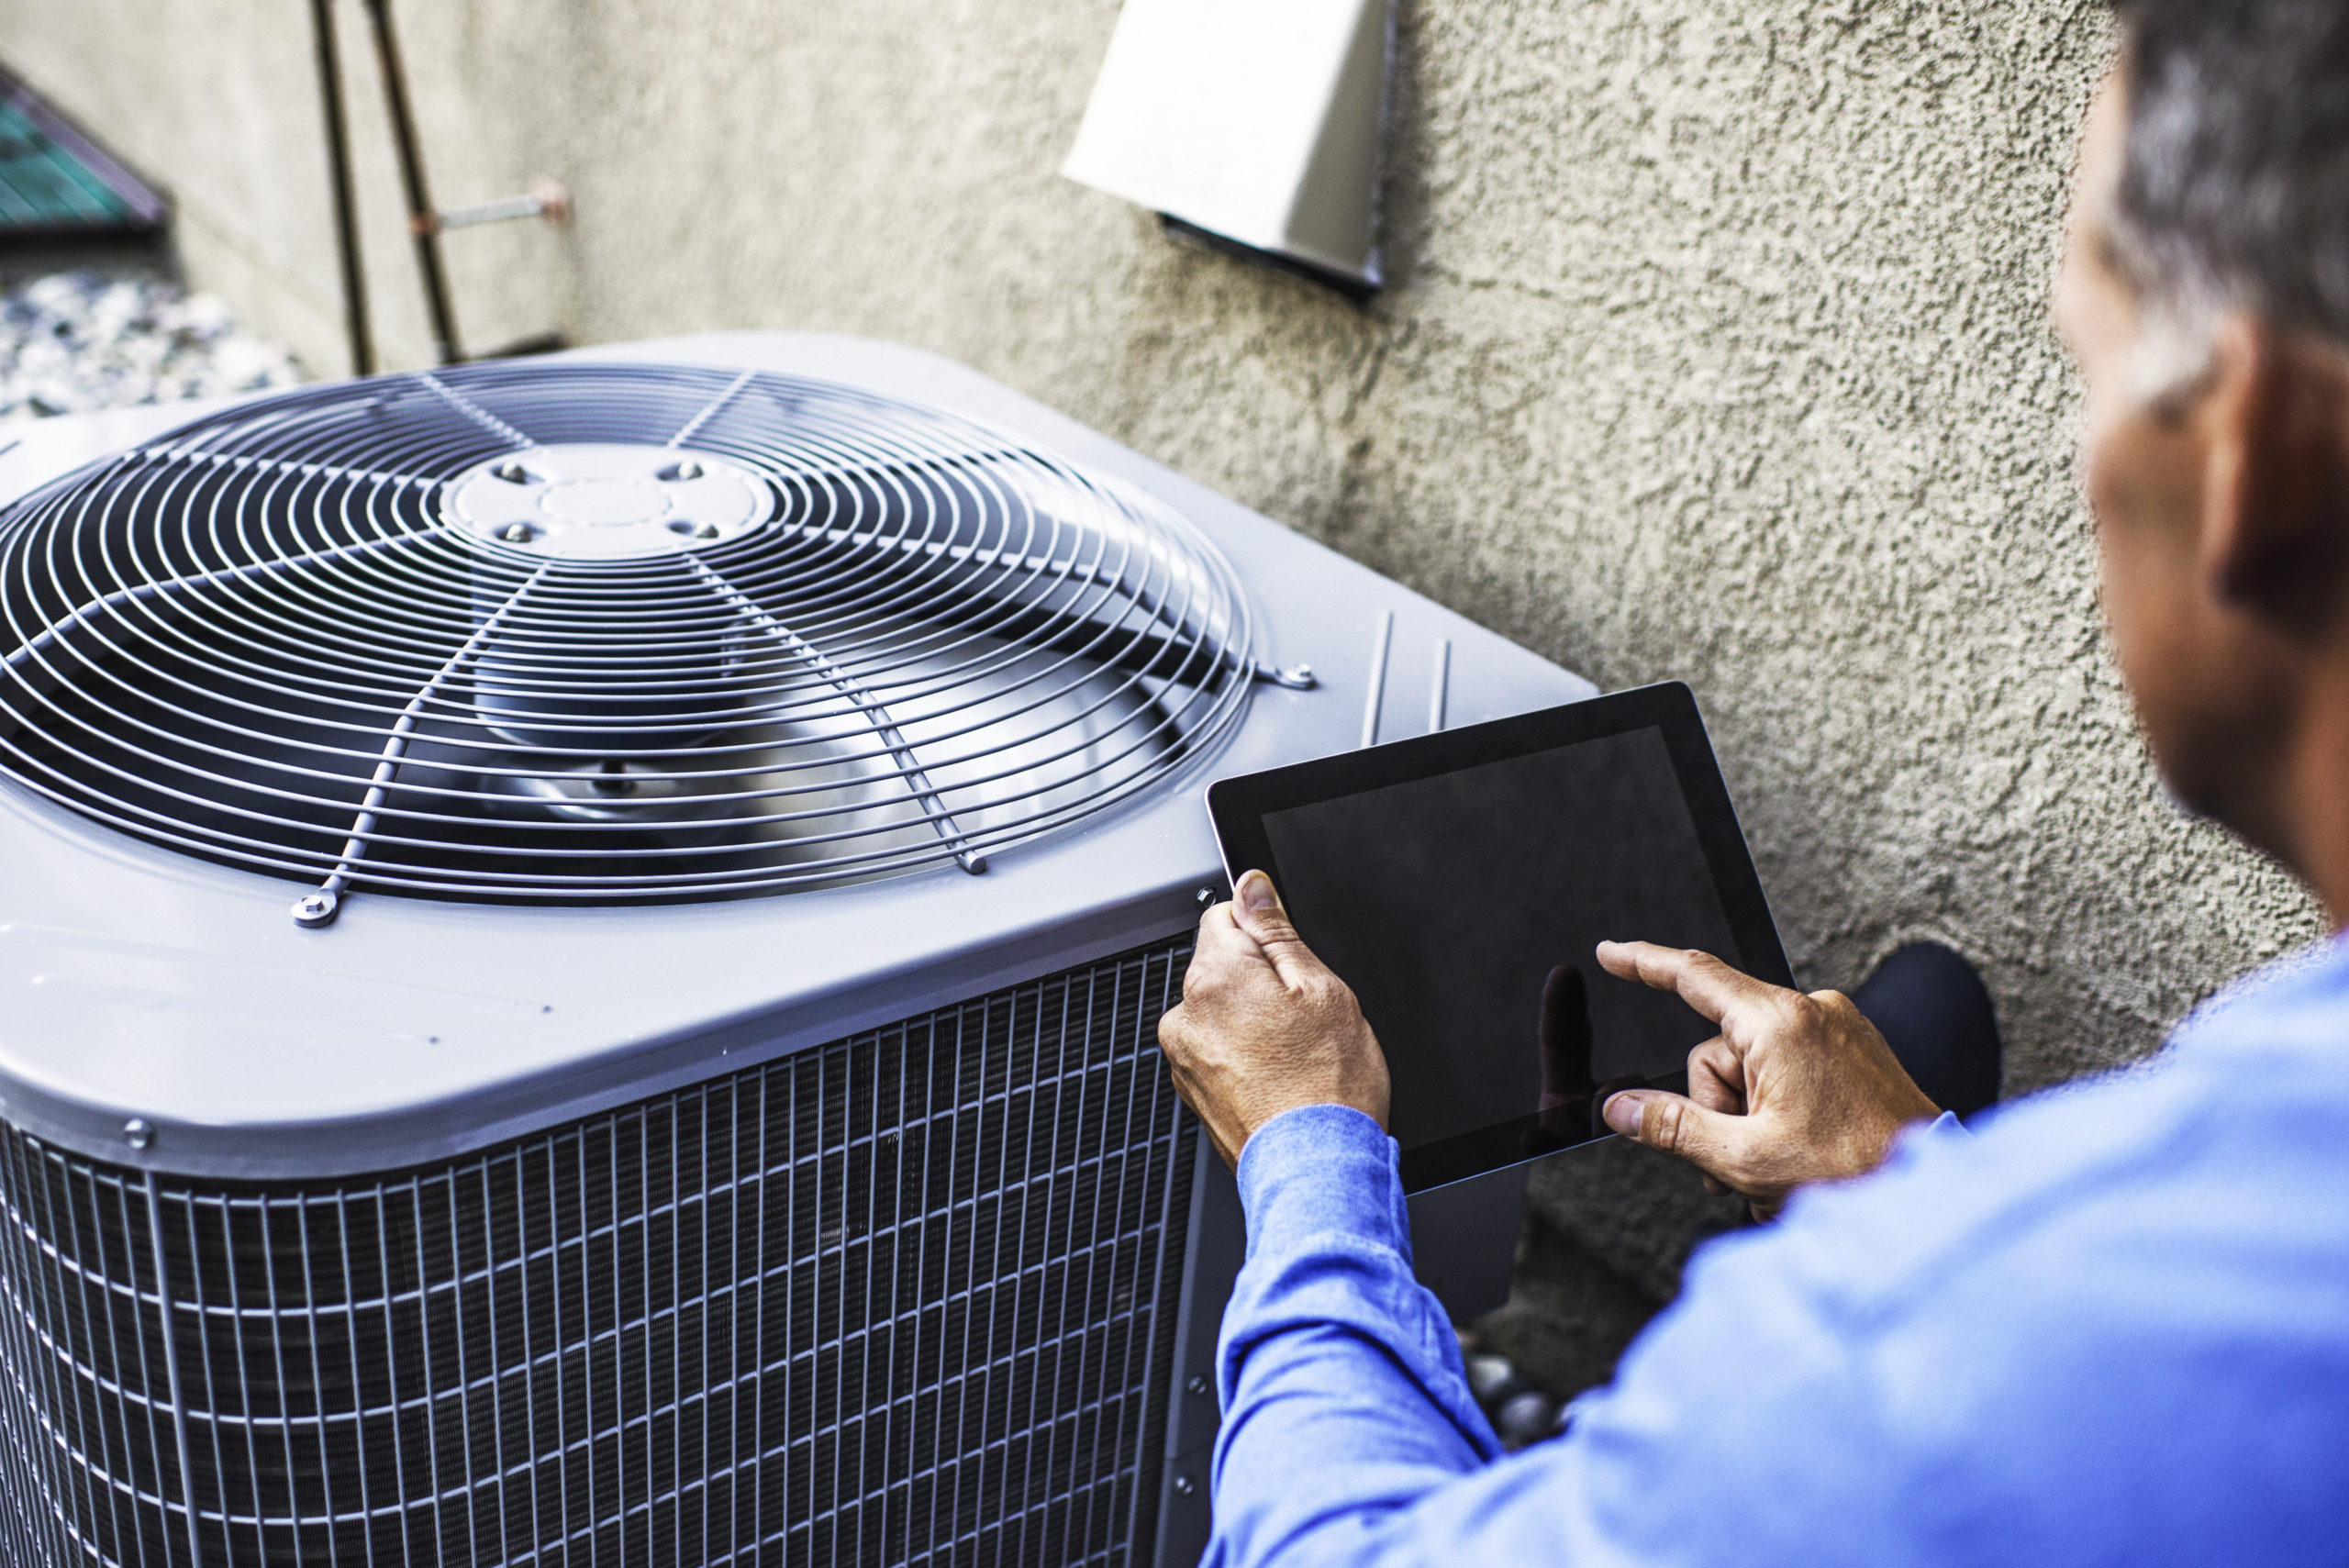 Asset maintenance depends on many factors. An AC unit might not have as many repairs in a cold climate as would be needed in a warmer climate.